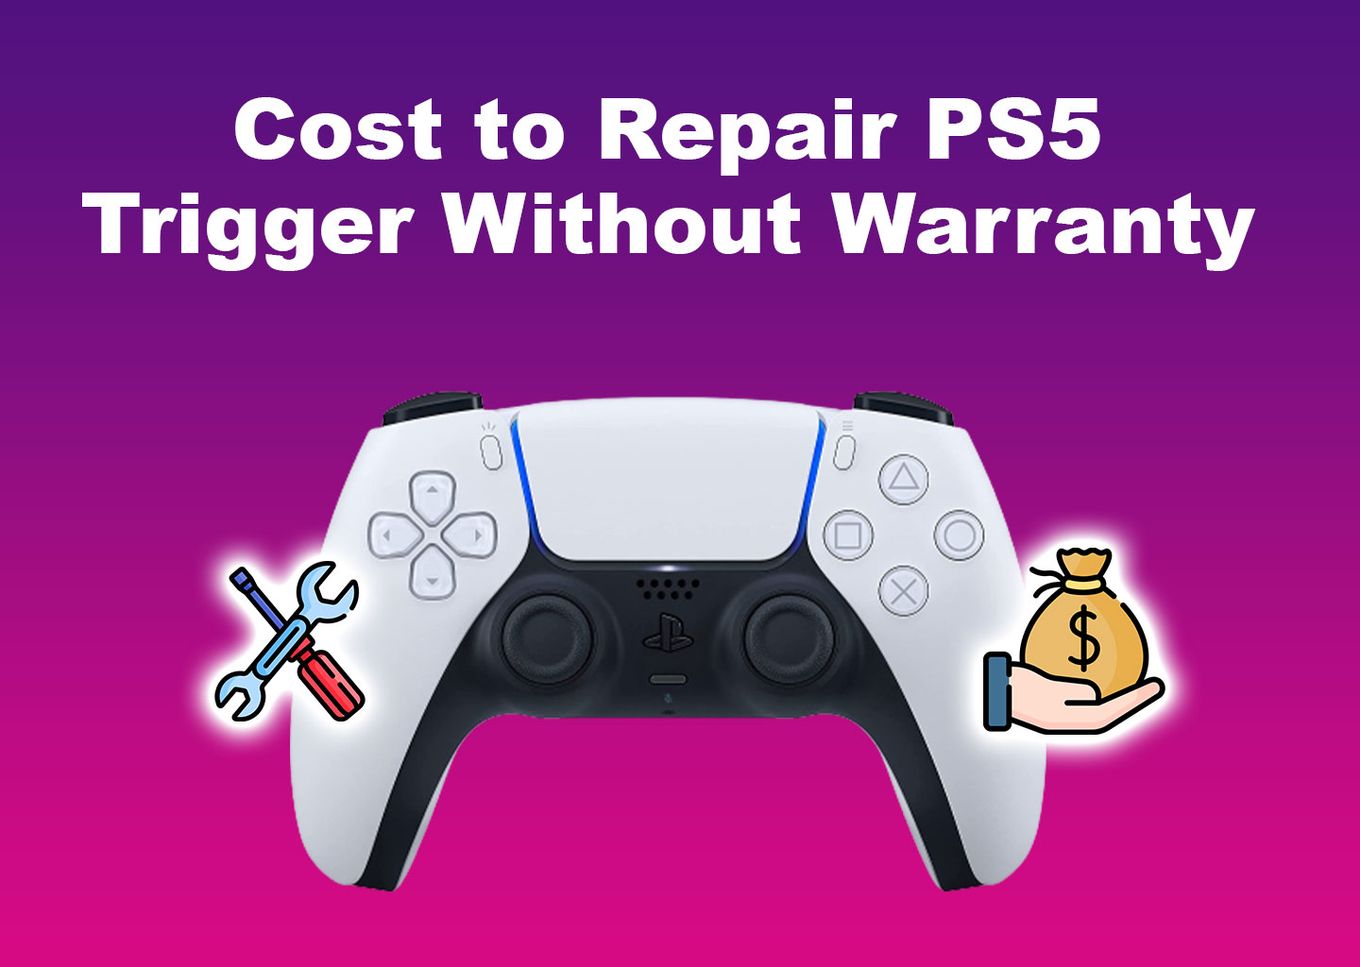 Cost to Repair PS5 Trigger Without Warranty